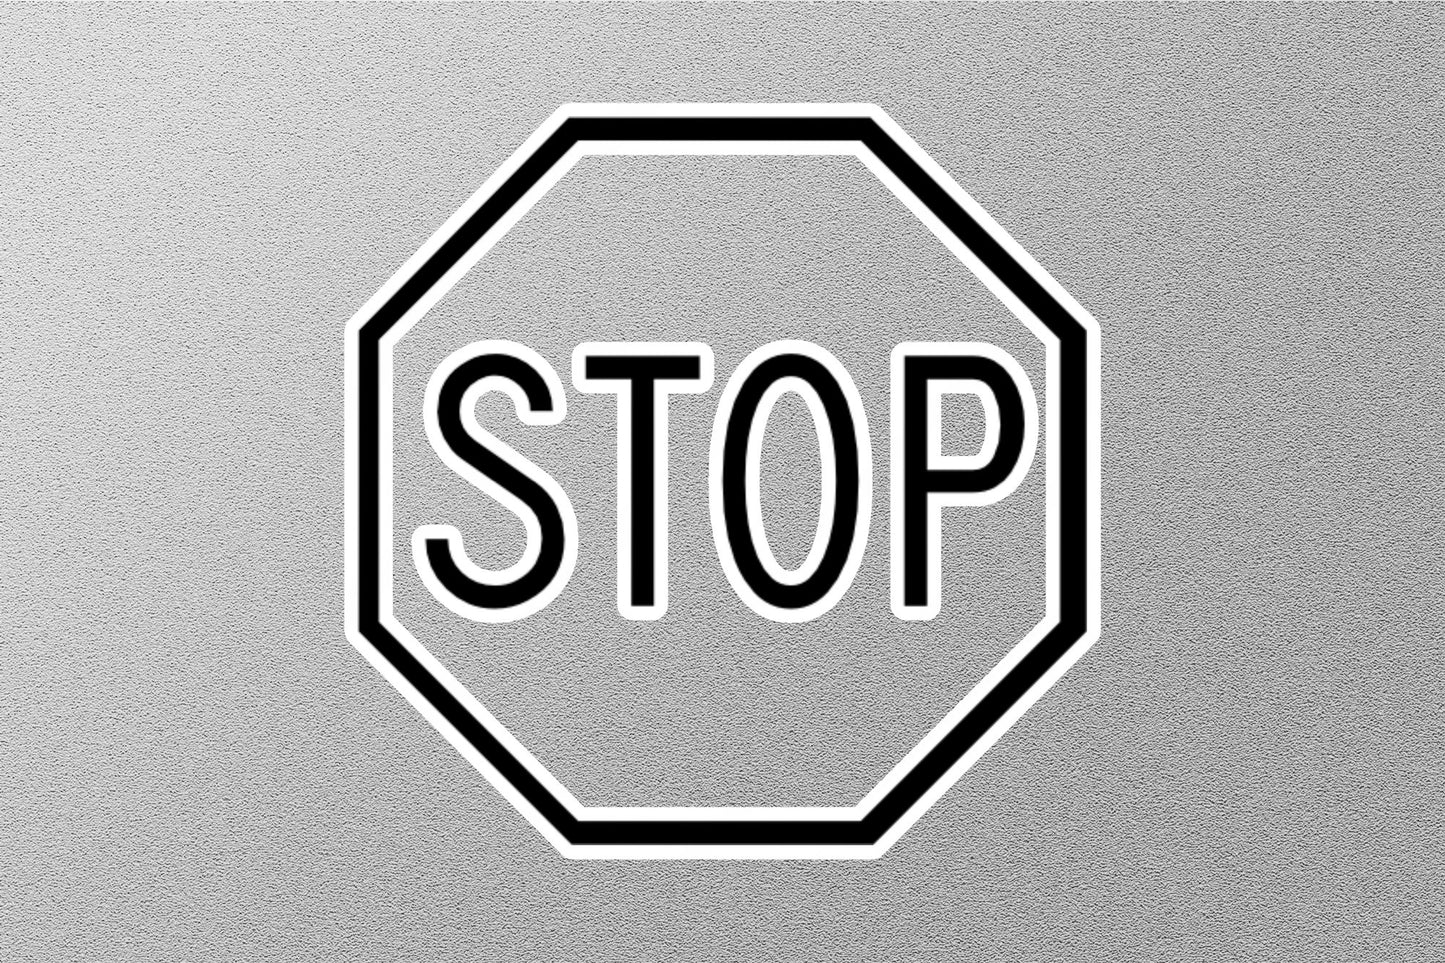 Stop Sign Sticker